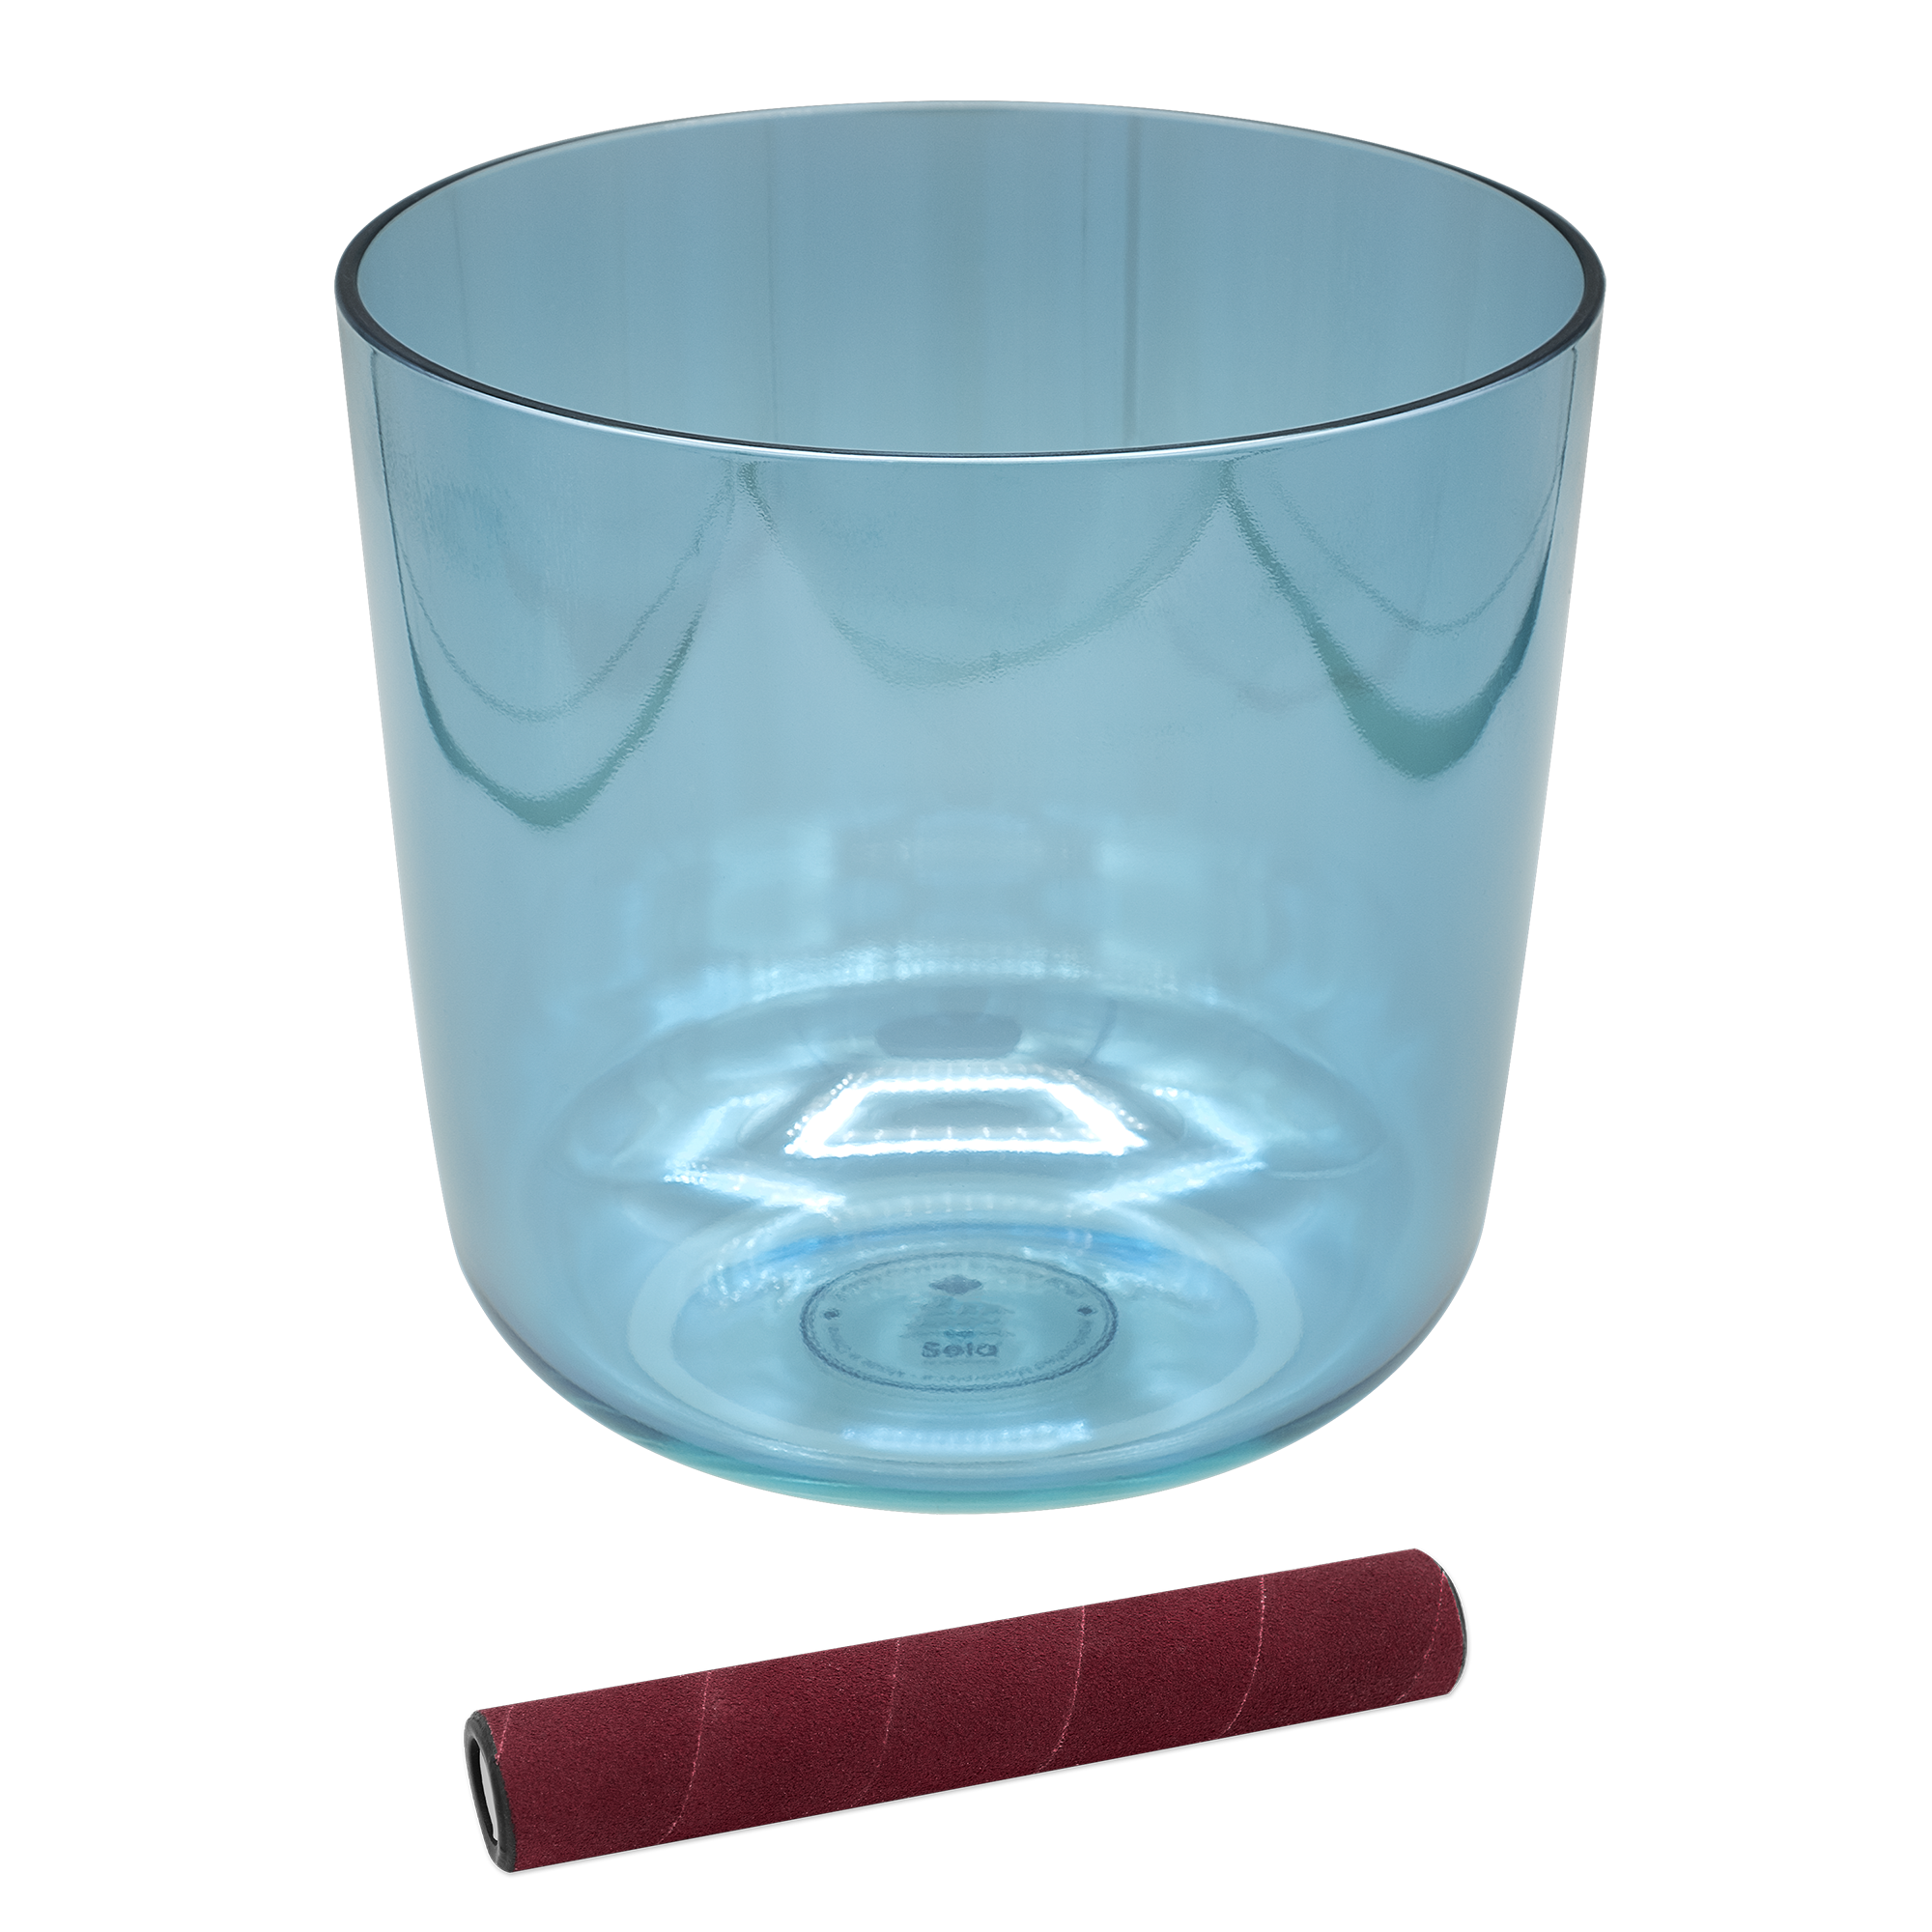 5.5” Infinity Crystal Singing Bowl in A4, 440 Hz, Blue